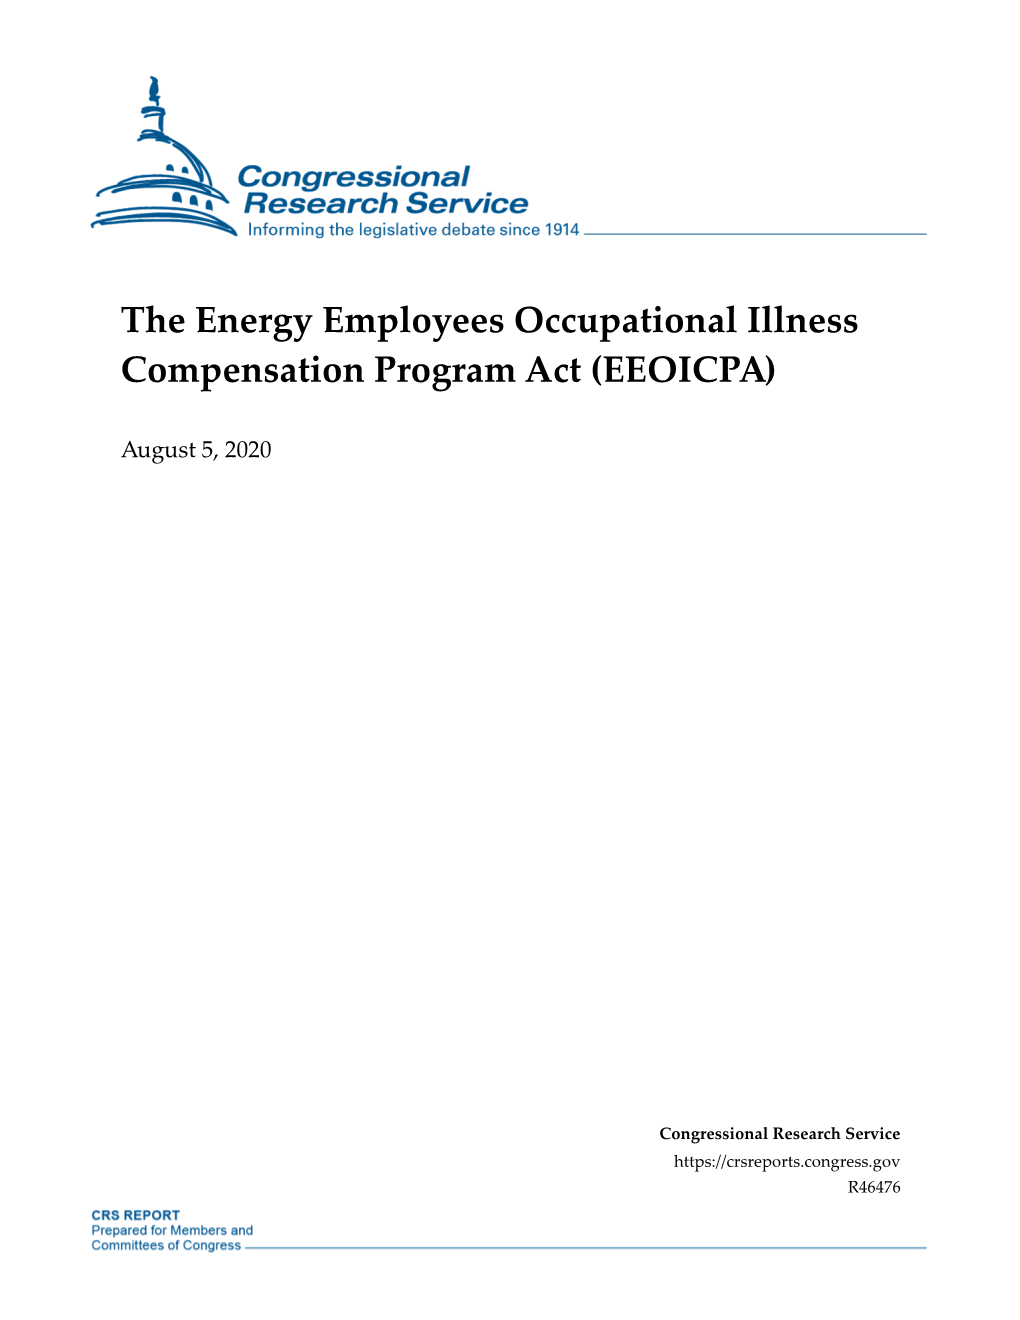 The Energy Employees Occupational Illness Compensation Program Act (EEOICPA)